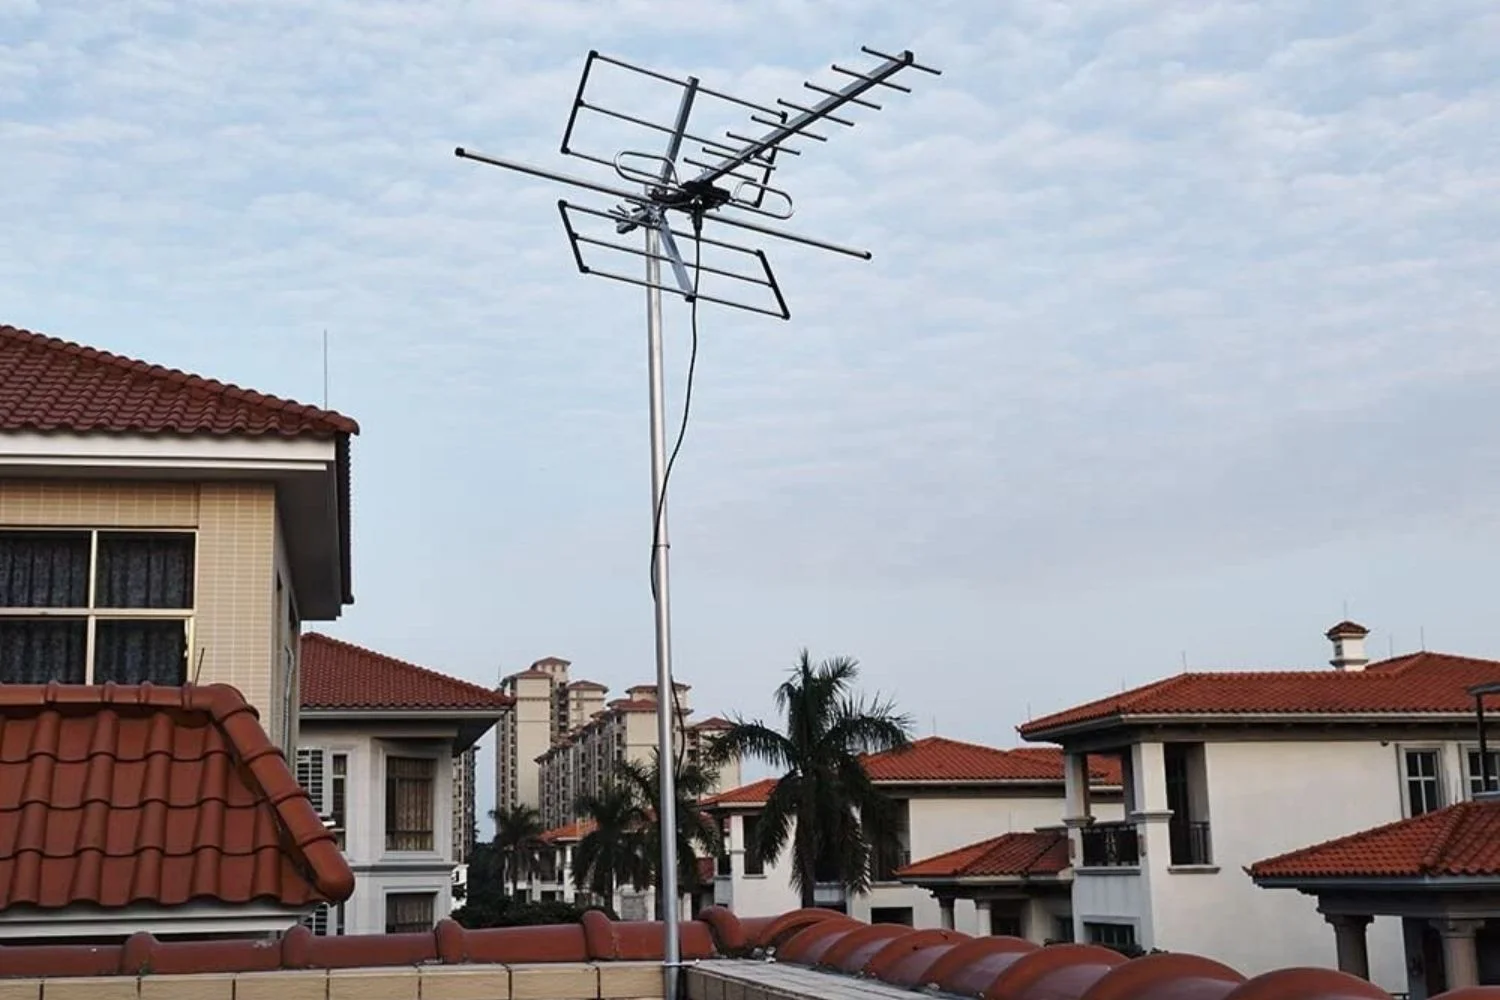 How To Get Better TV Reception With An Outdoor Antenna